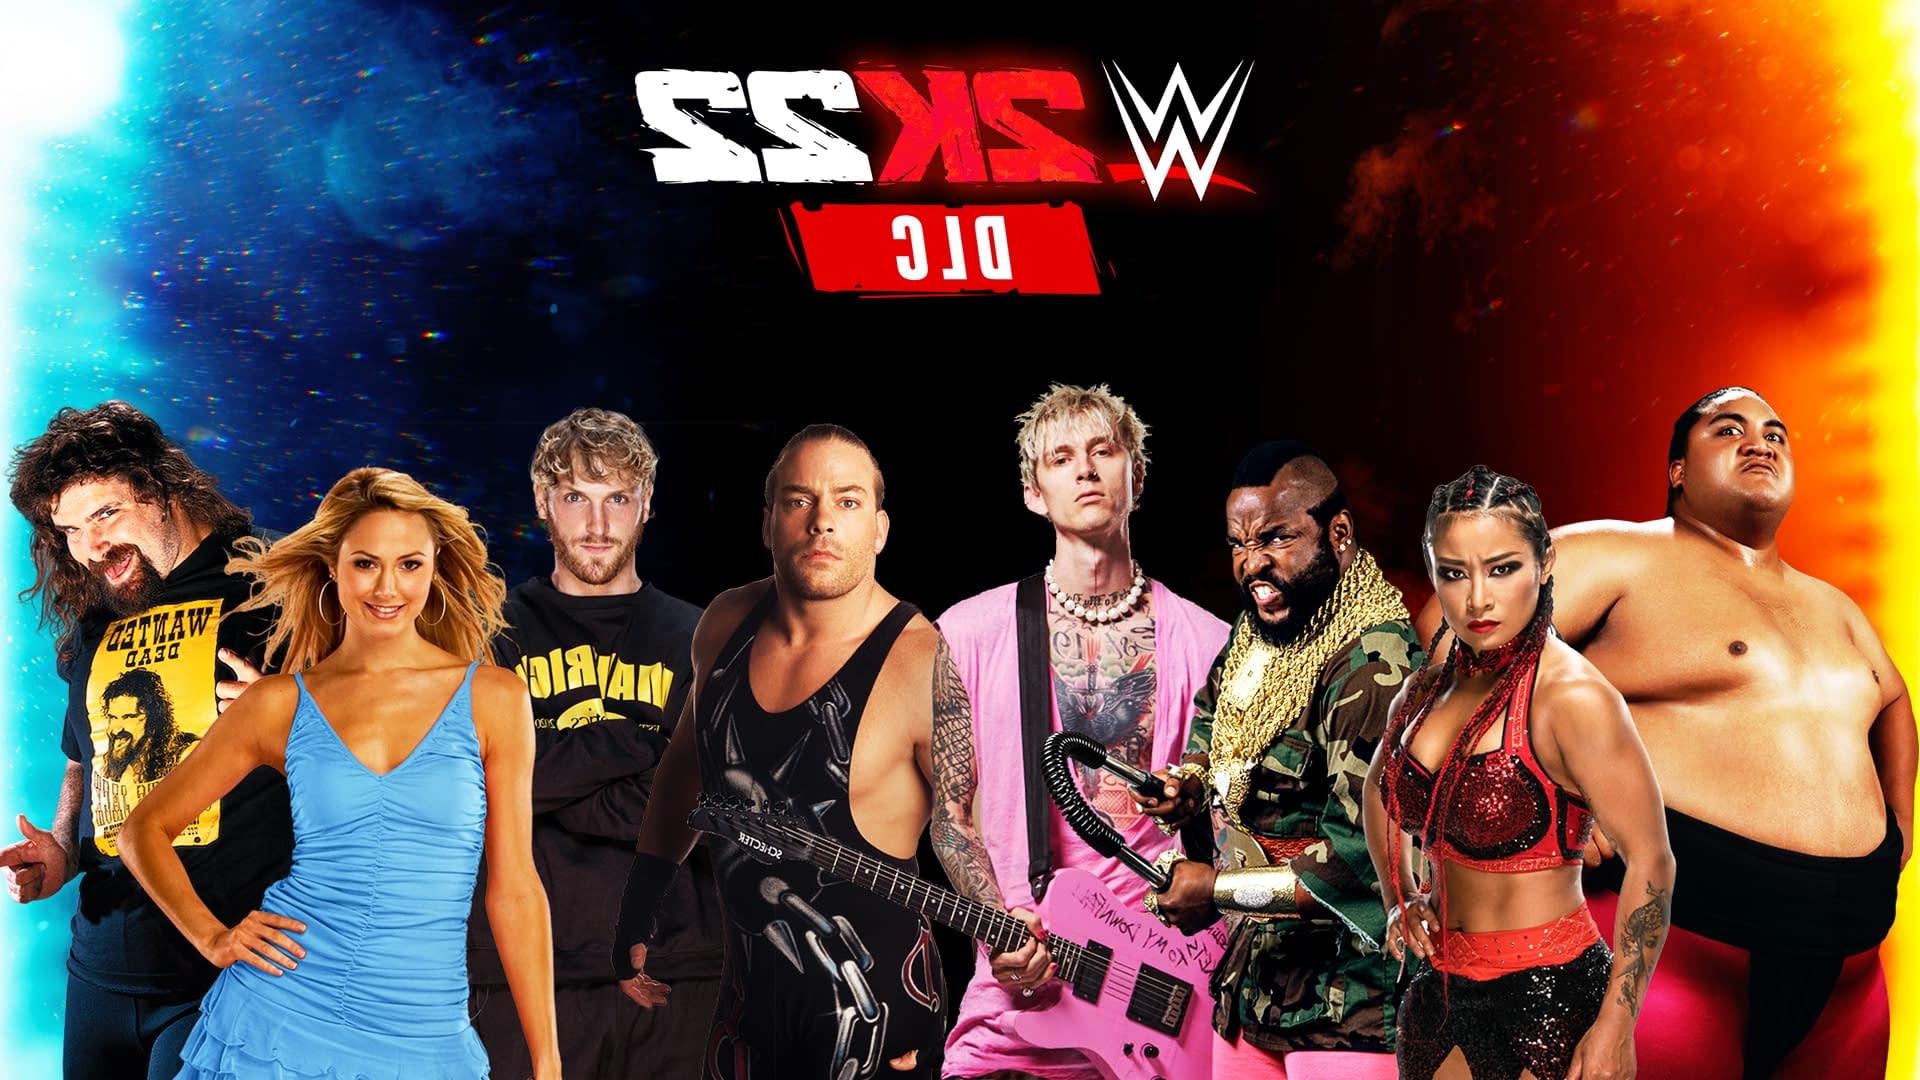 WWE 2K22 will have 28 DLC characters made up of modern stars